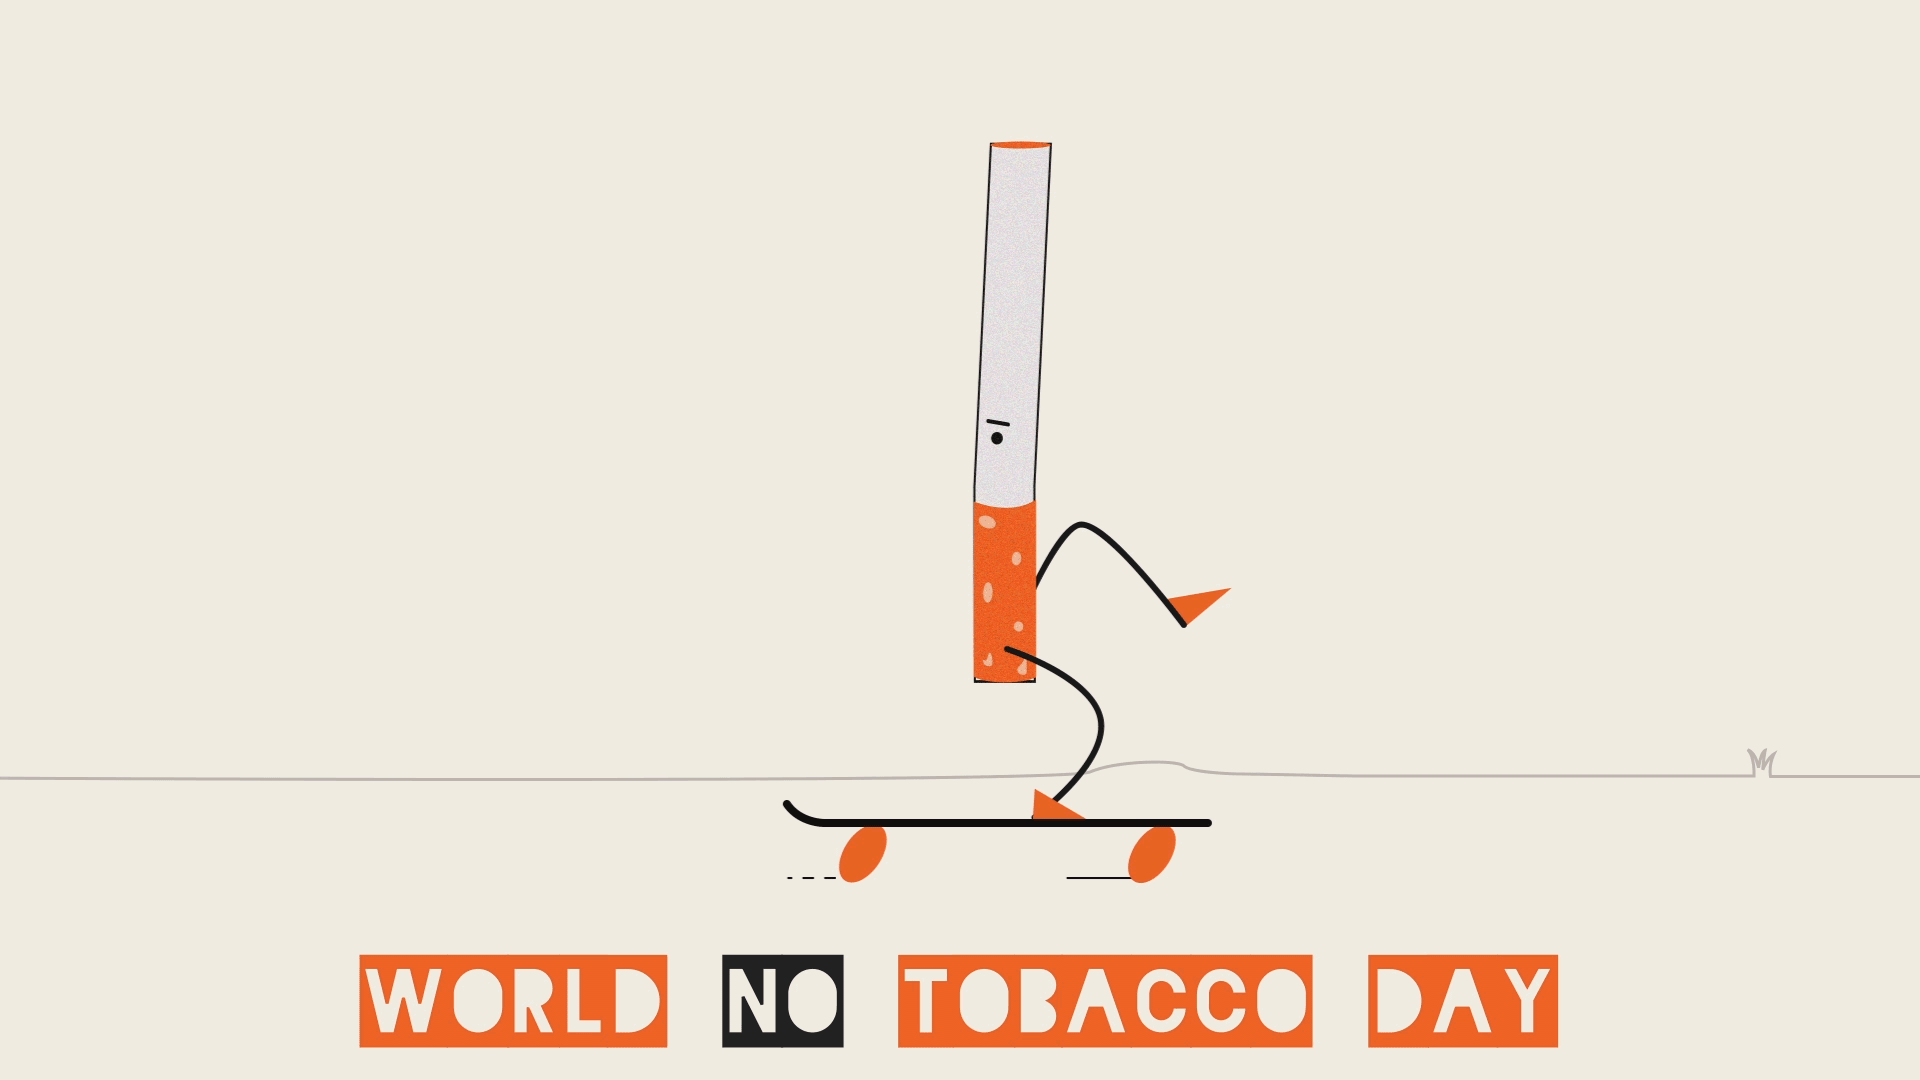 Tobacco day no world When is